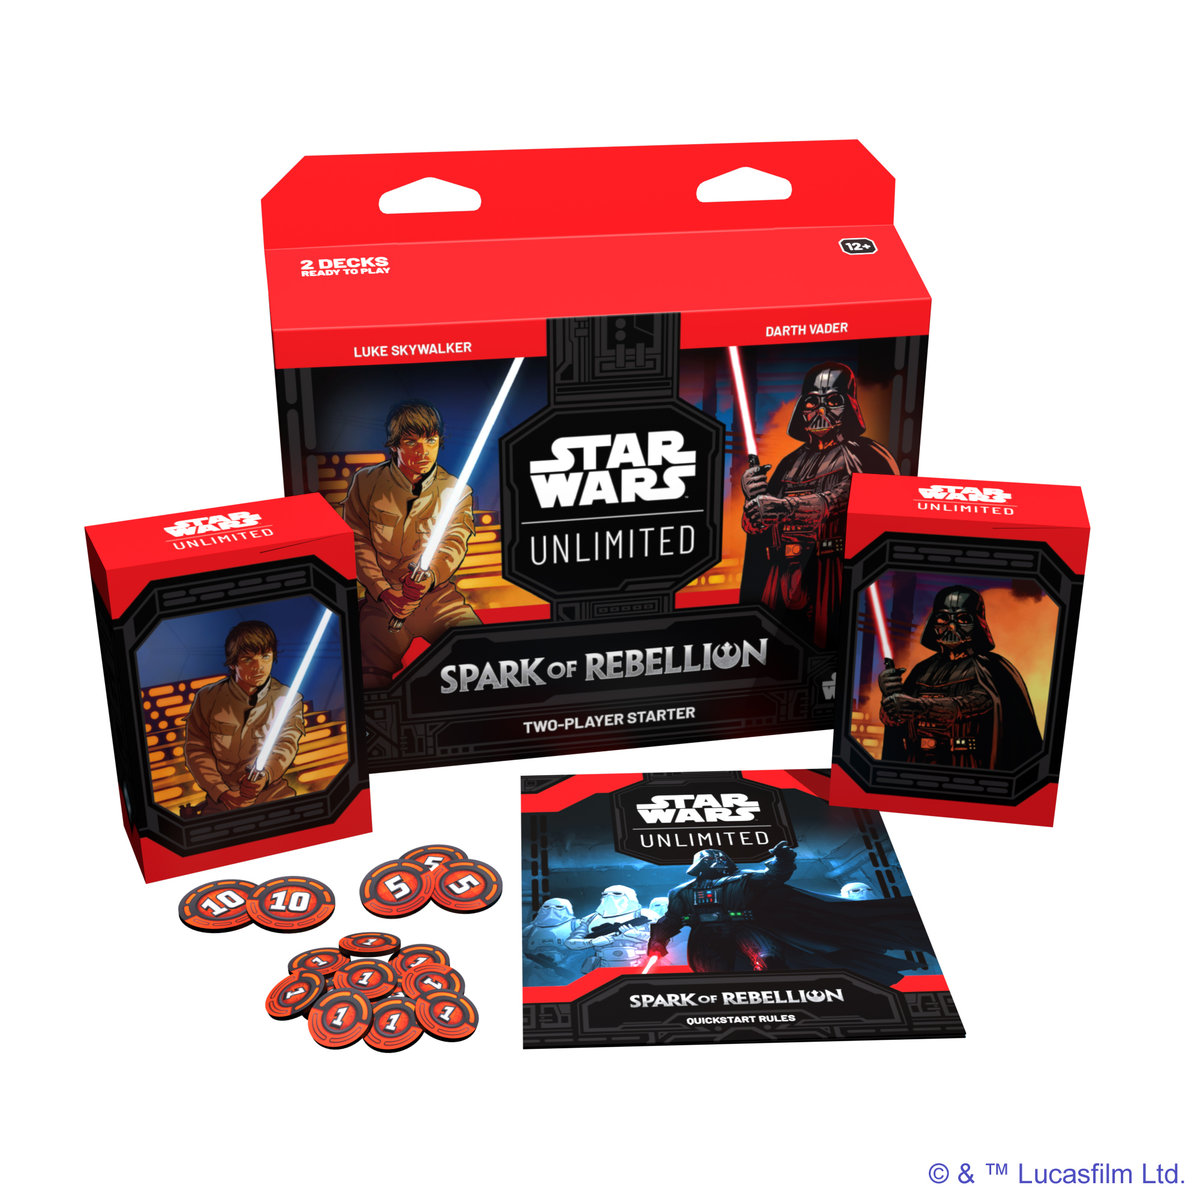 Star Wars Unlimited sparks of rebelion Two-Player Starter